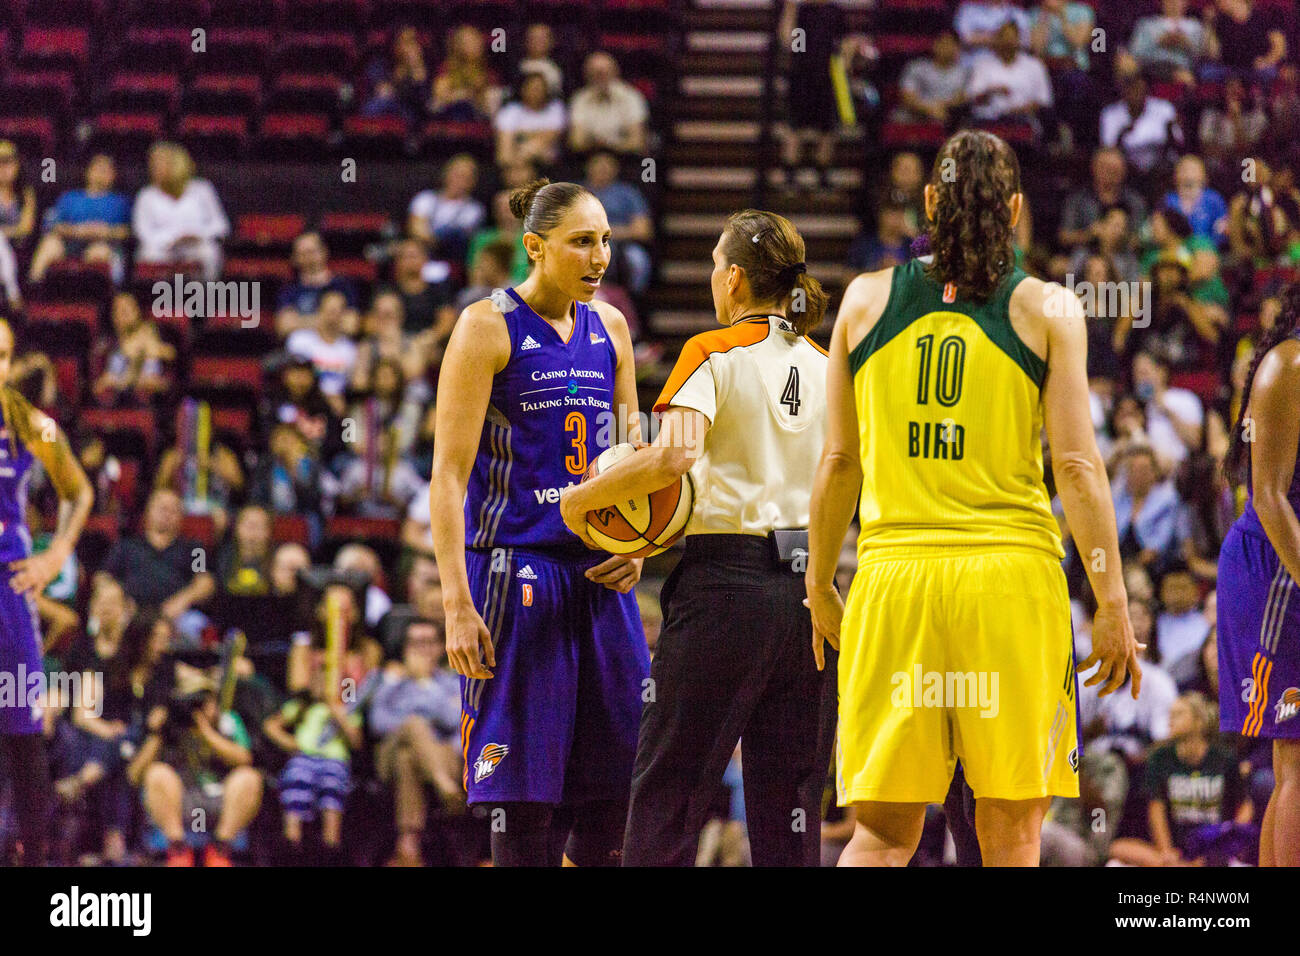 View of female basketball players and referee on court during game, Seattle, Washington State, USA Stock Photo